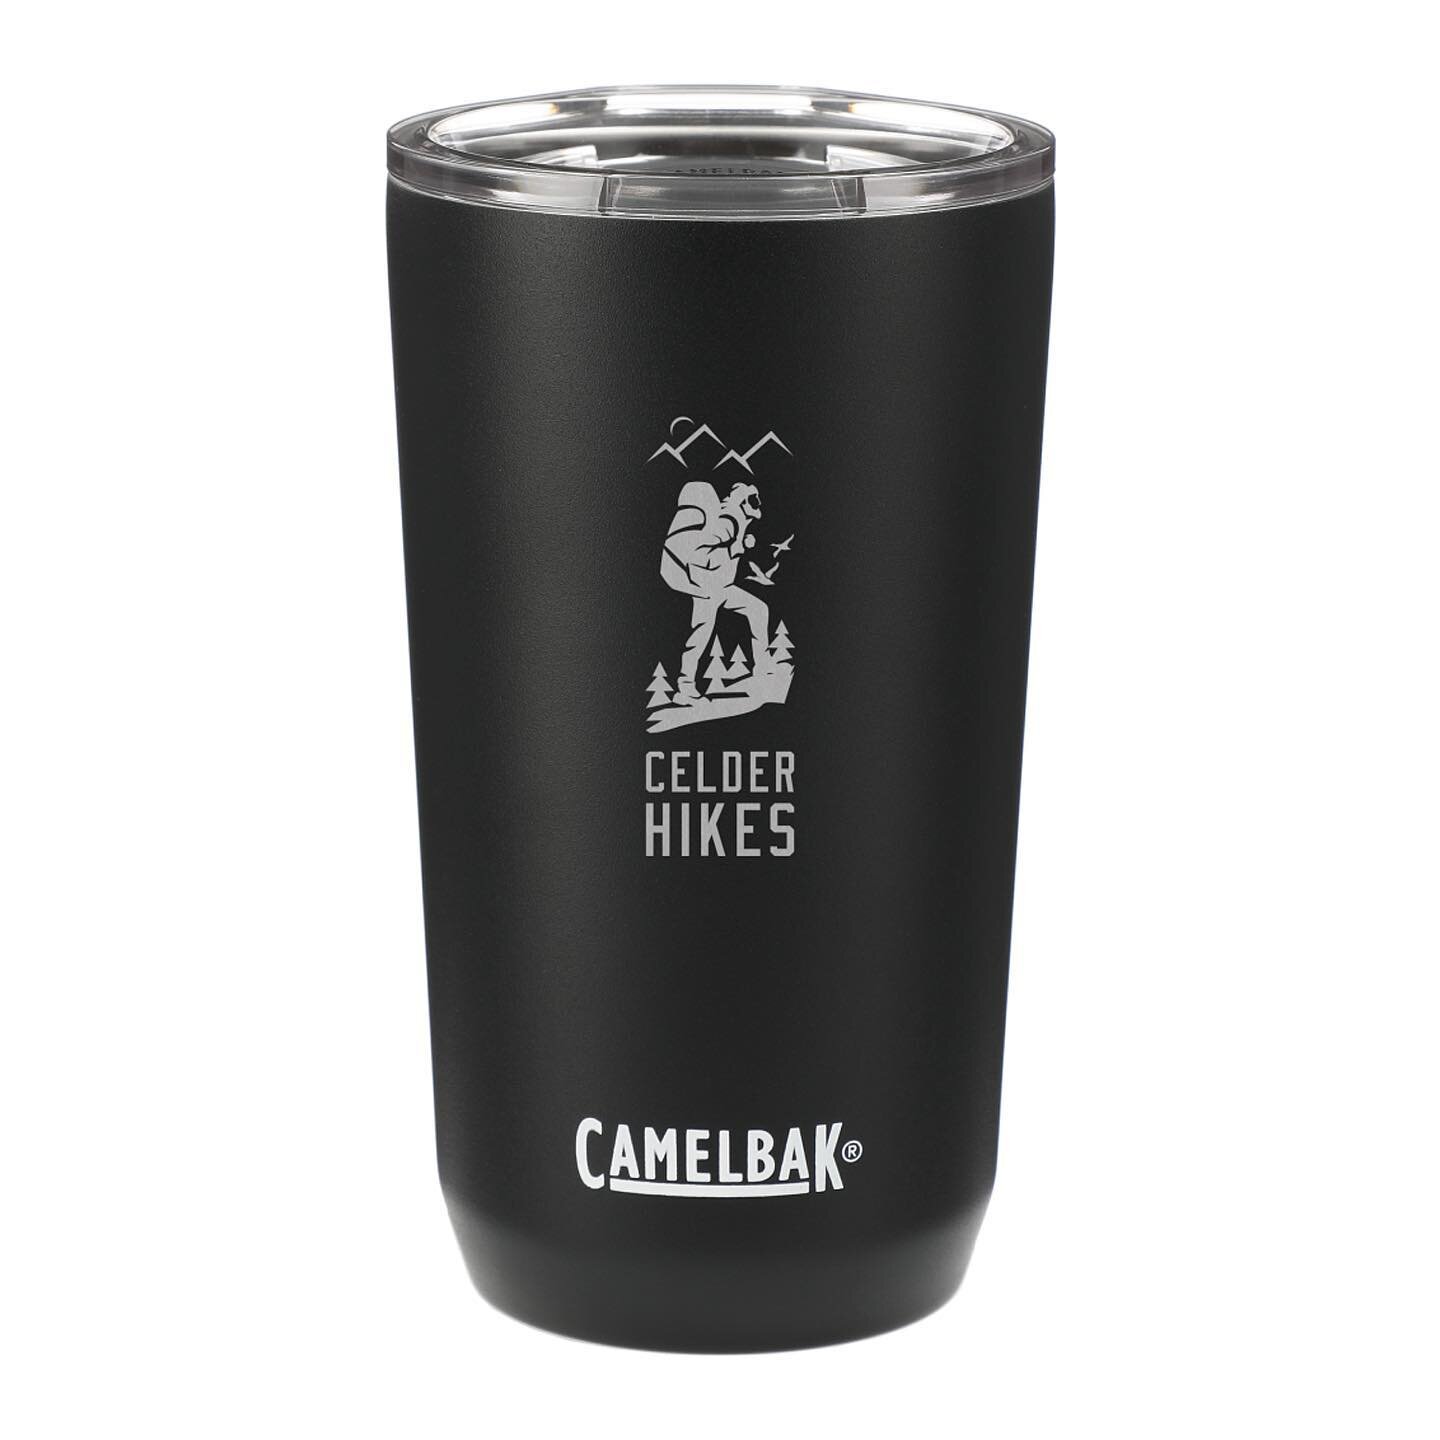 With tee times getting booked! Beach days just around the corner! Keep your drinks cold with a custom @camelbak tumbler!! Whether you are a school, business or sport/recreation team, our staff of professionals will work with you to make sure your log